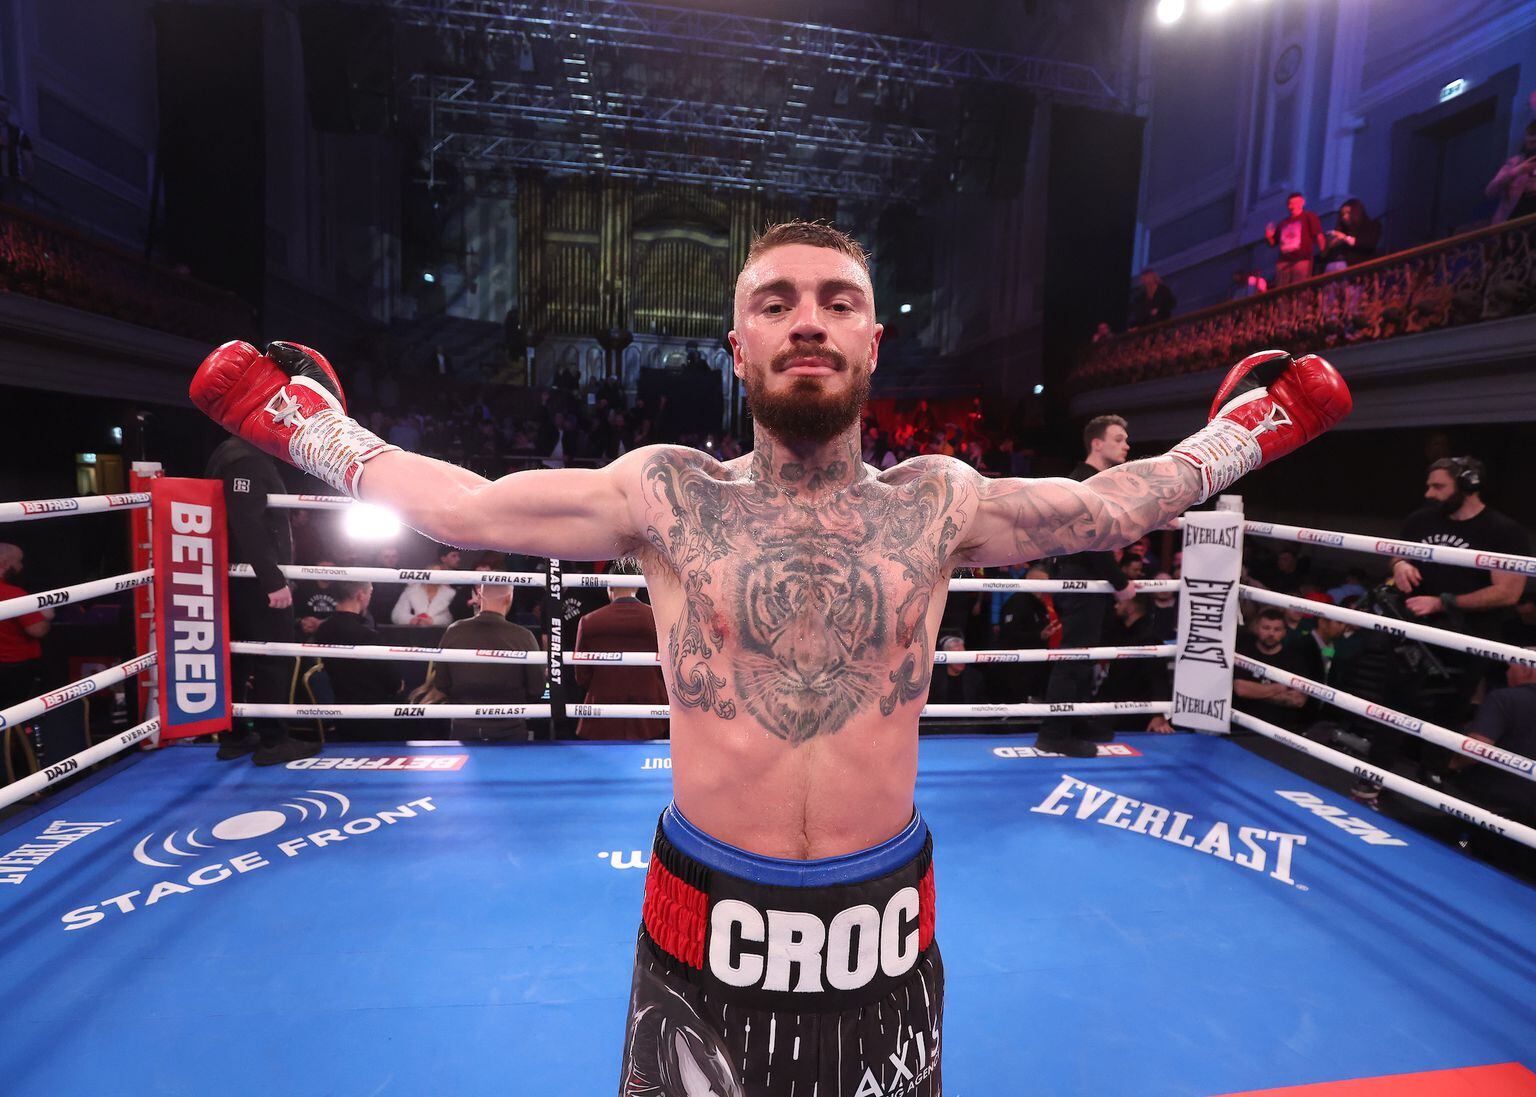 “tyrone, where i come from, that fighting spirit is in us all...” fergal mccrory ready to shock world champion lamont roach jnr